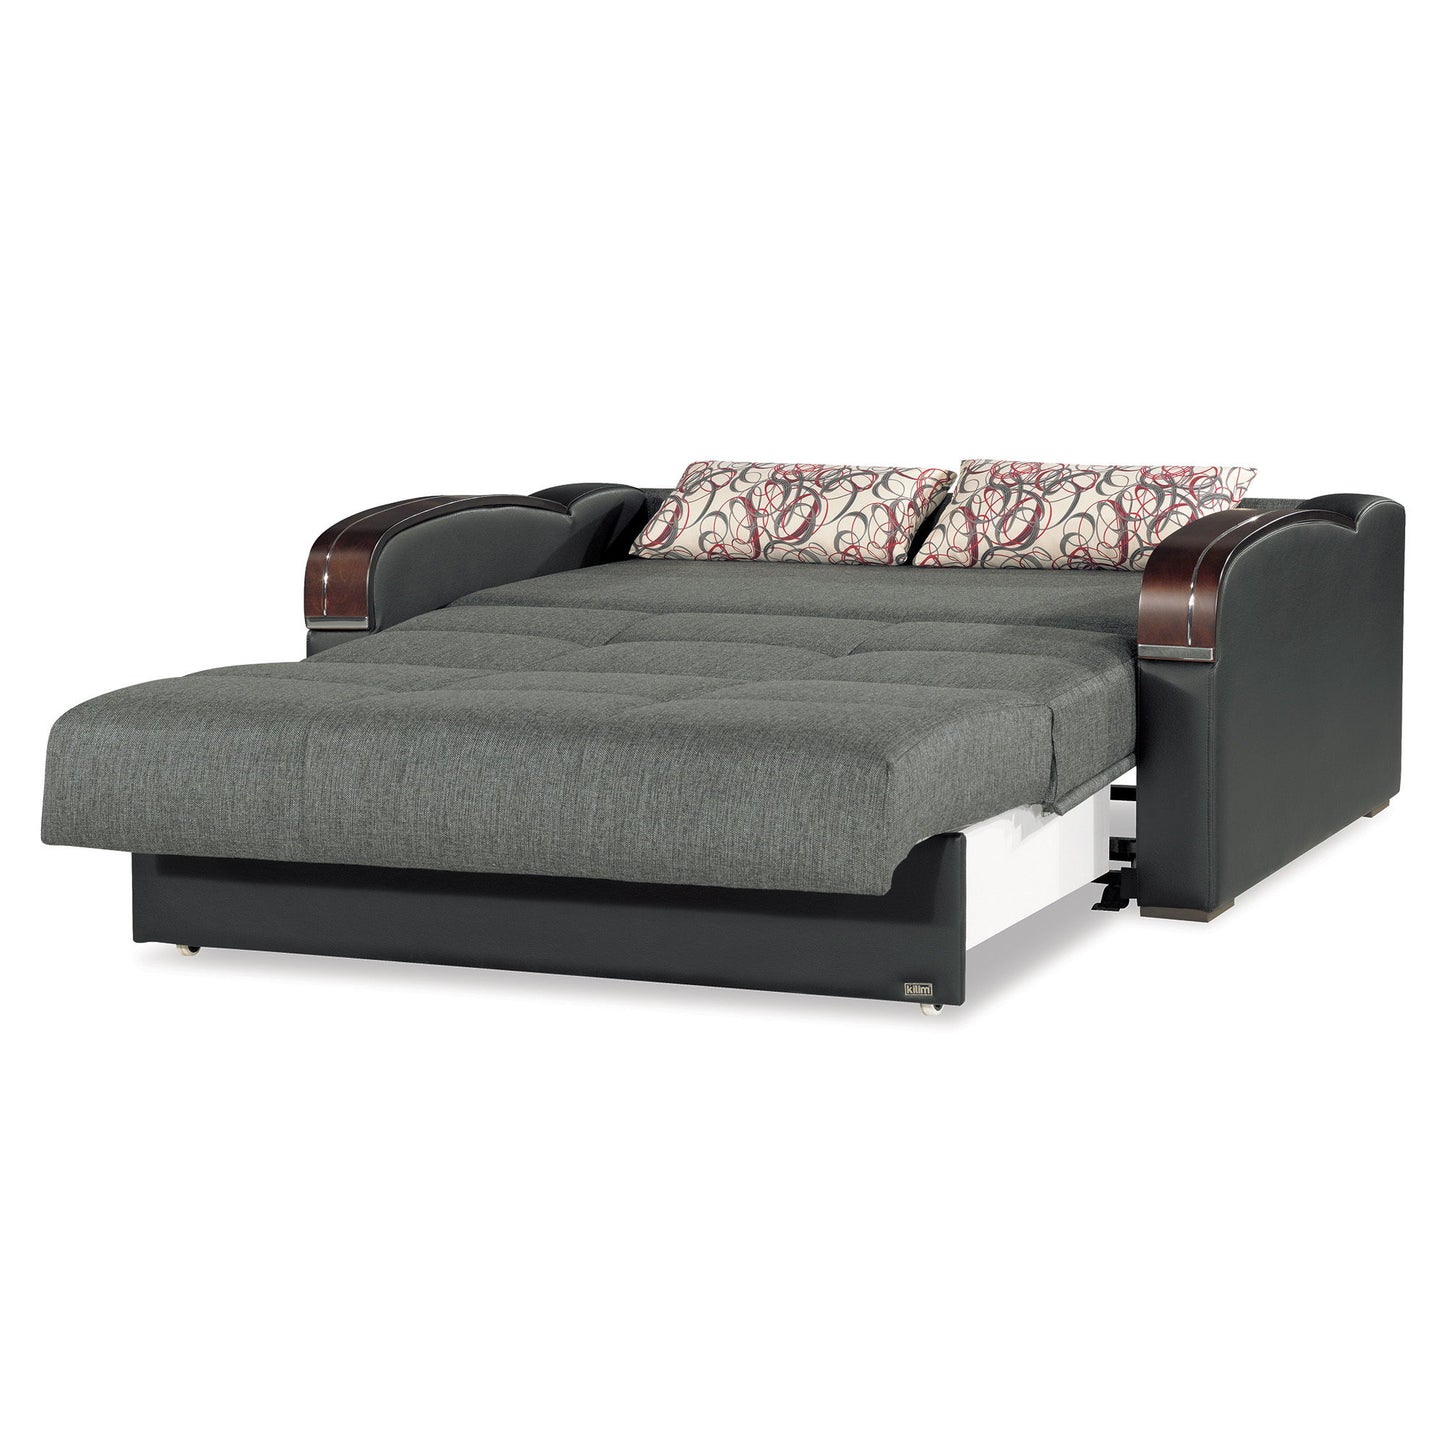 Ottomanson Snooze - Convertible Sofa Bed With Storage